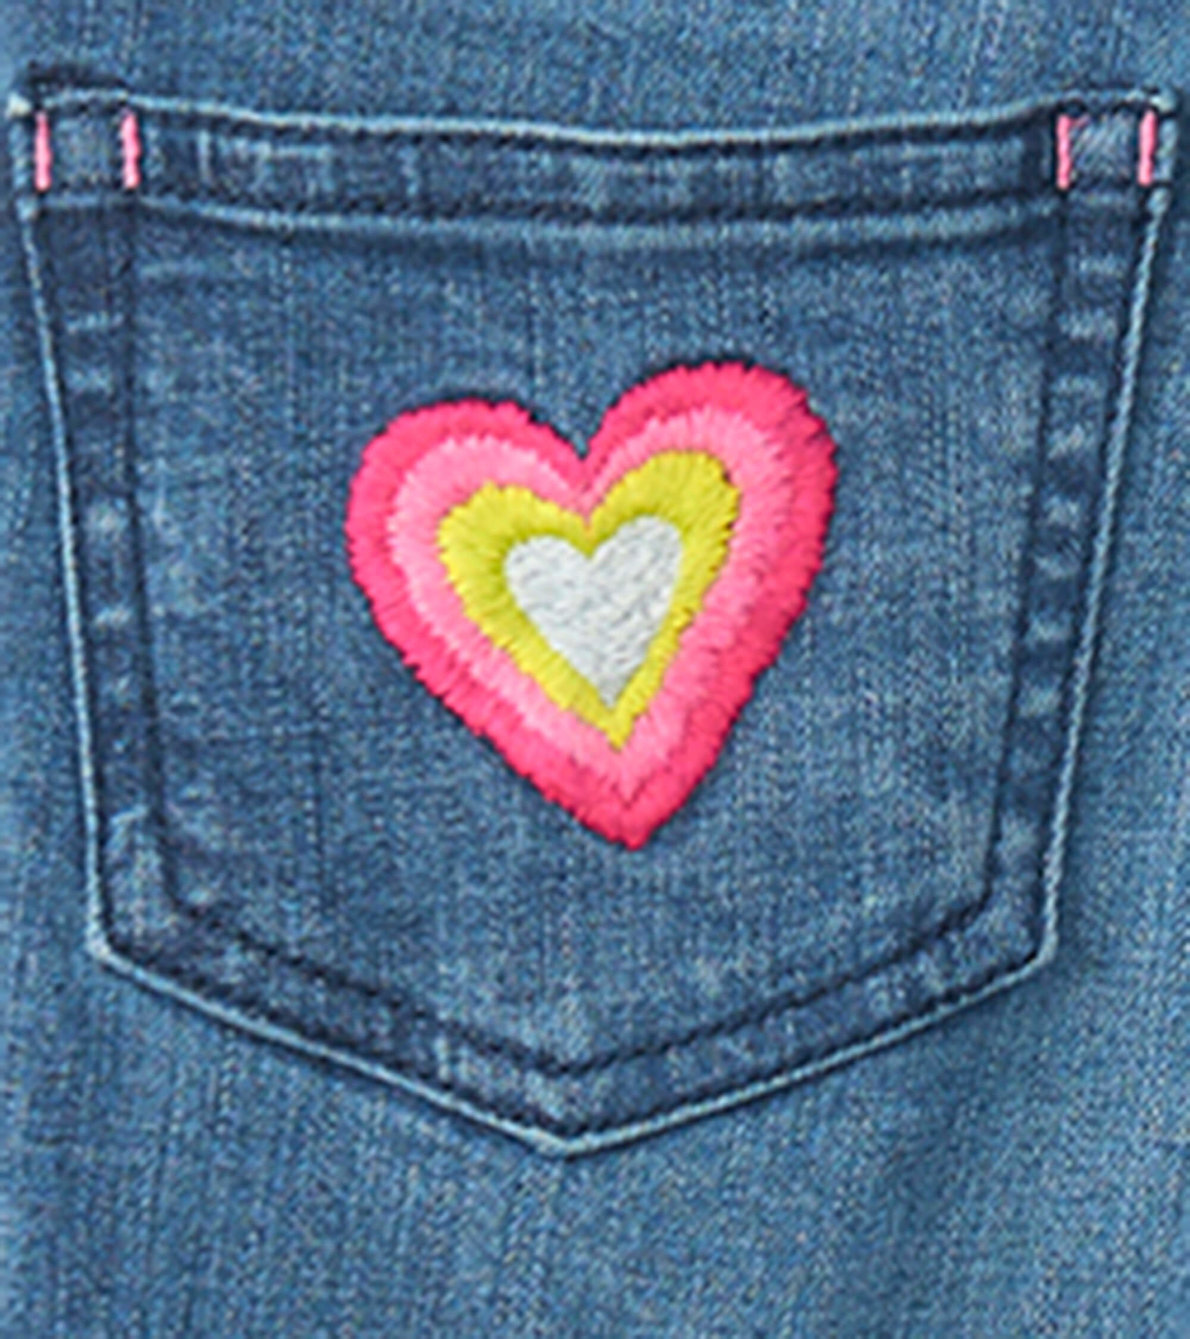 View larger image of Girls Denim Stretch Classic Overalls